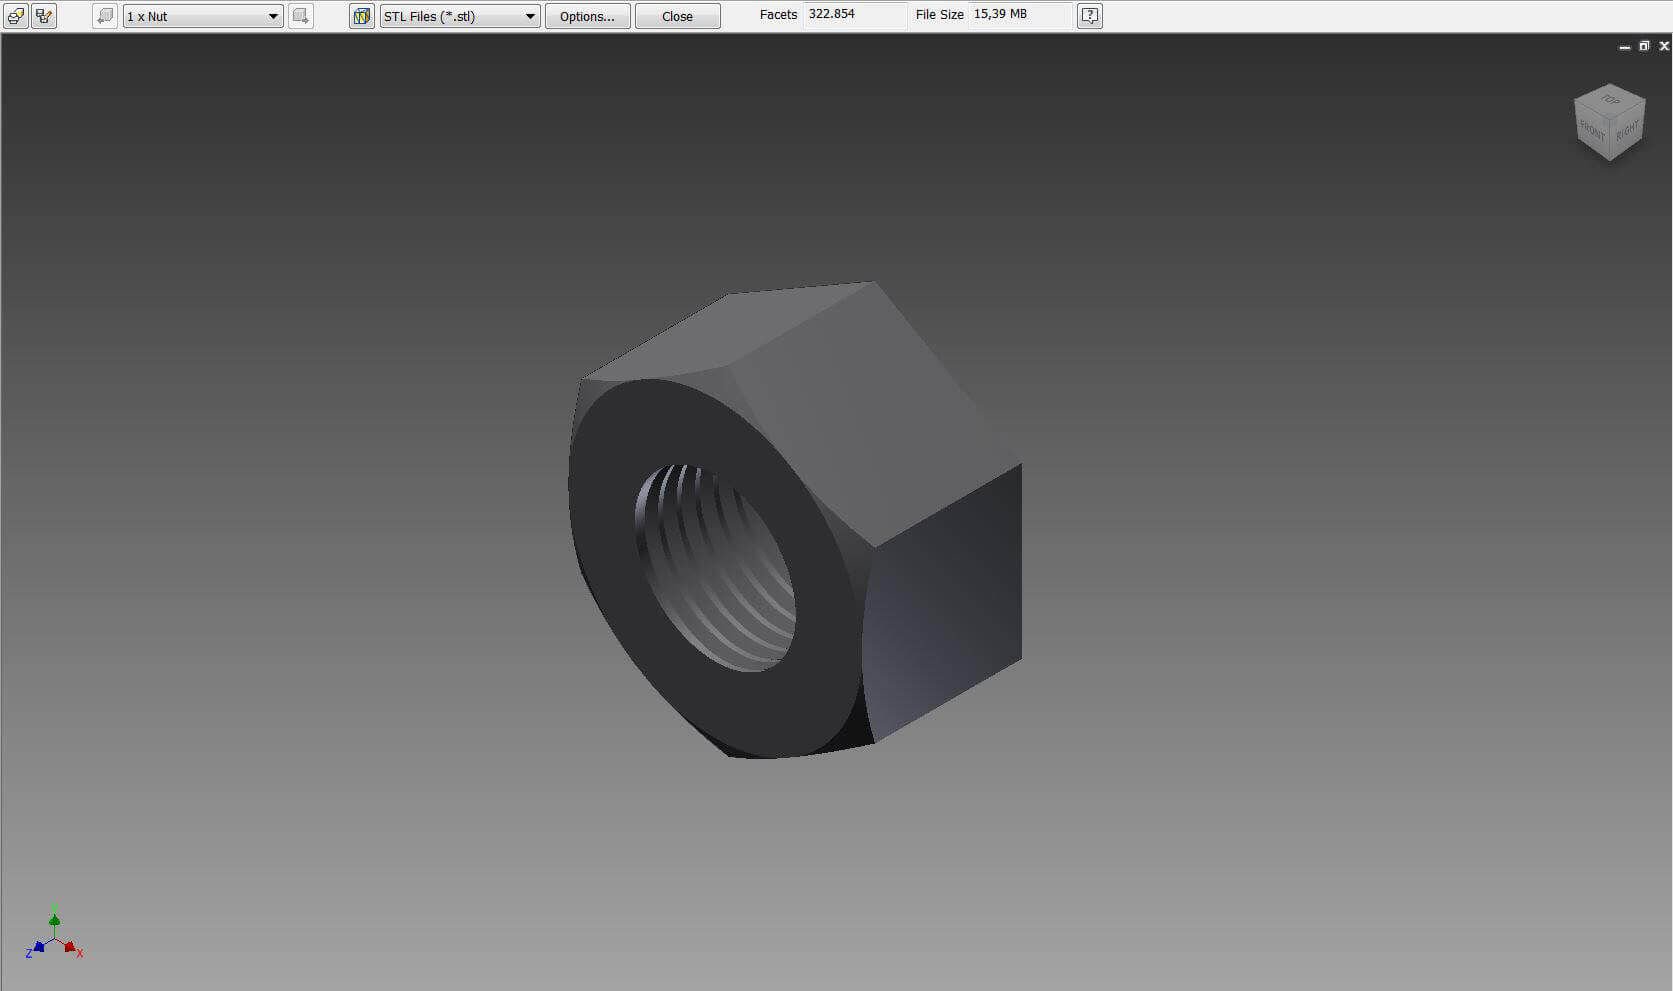 Autodesk Inventor Tutorial: Analyse and Export for 3D Printing